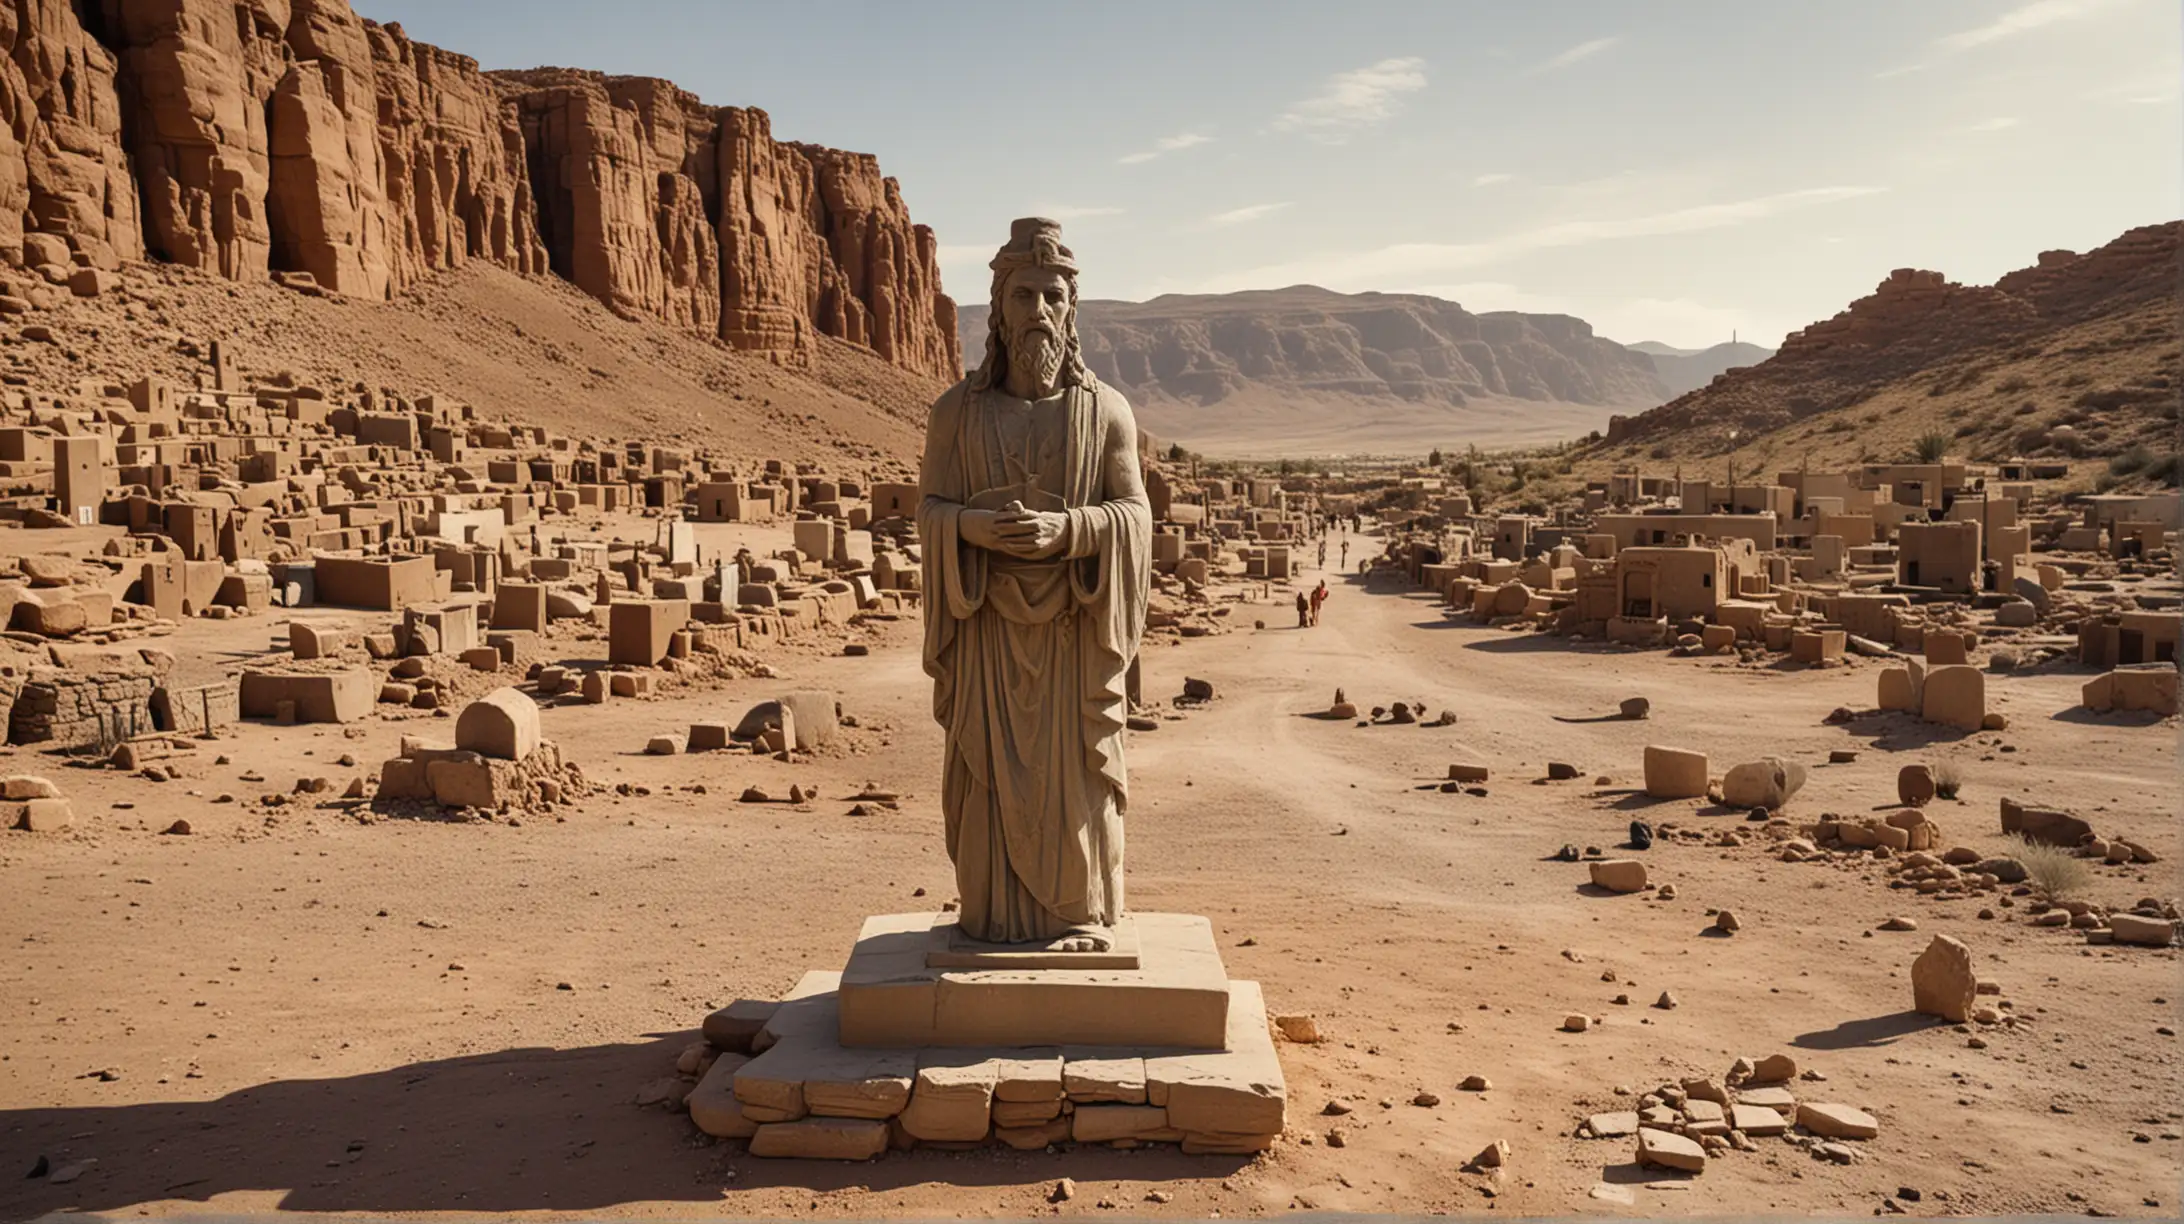 a pagan Statue idol in the centre of a desert town,  with an altar  in front of it. during the biblical era of Moses.